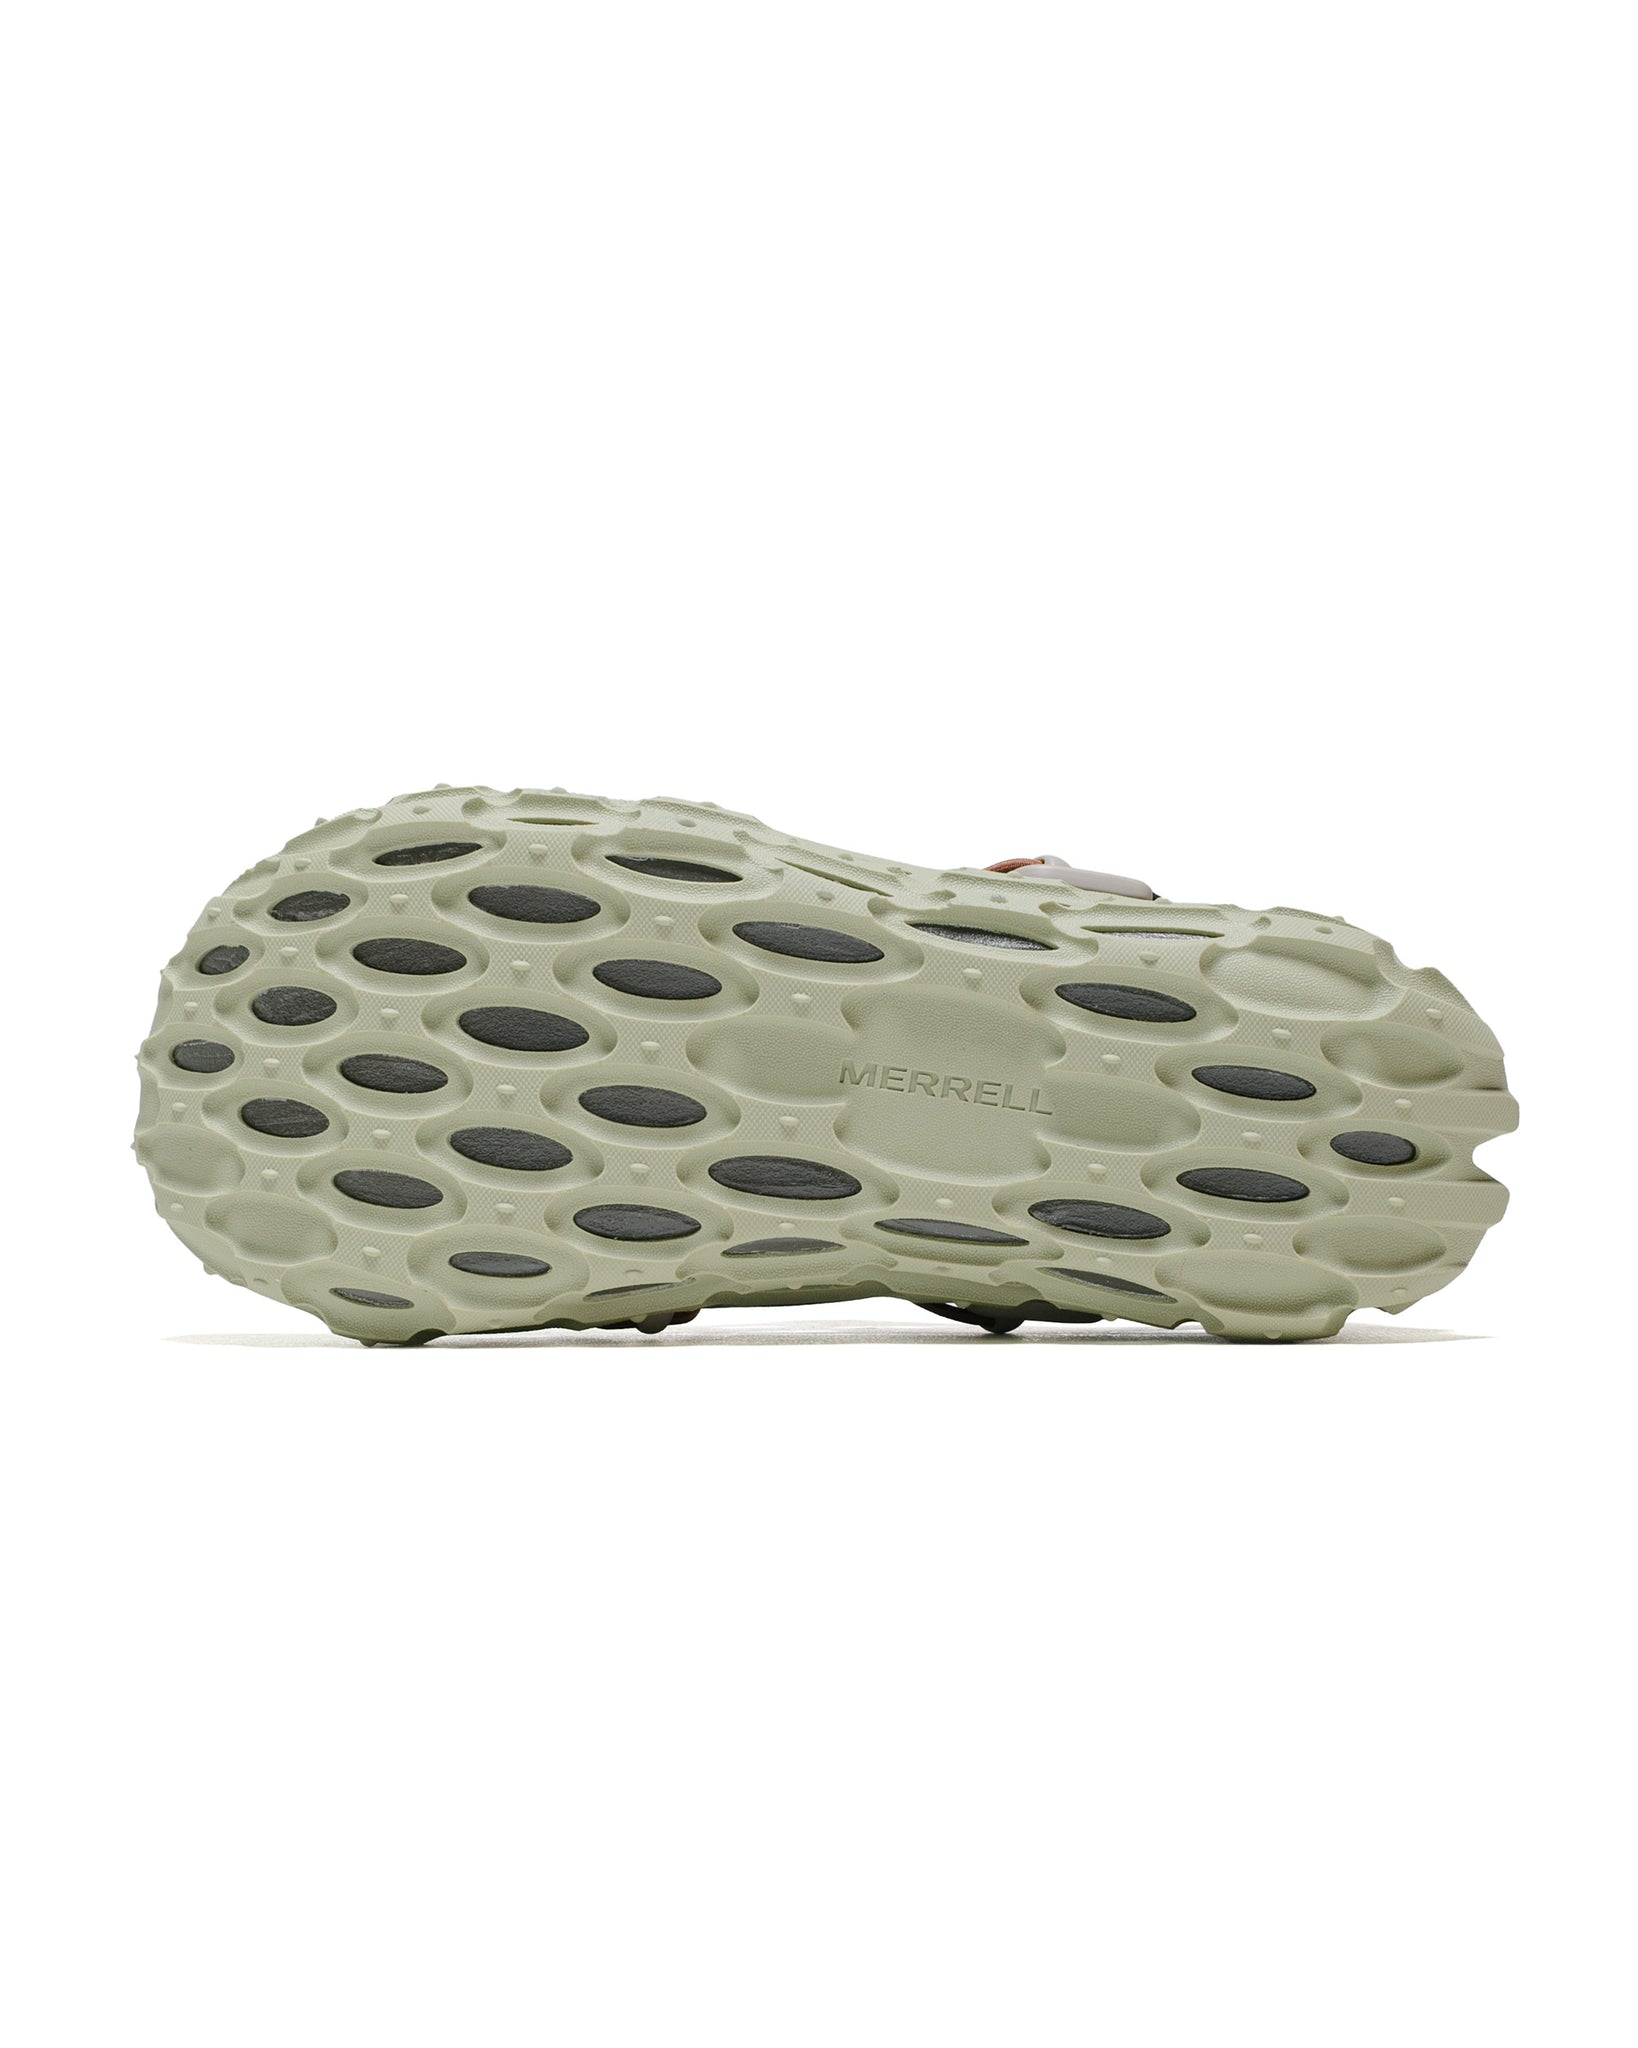 Merrell Hydro Moc AT Cage 1TRL Boulder sole